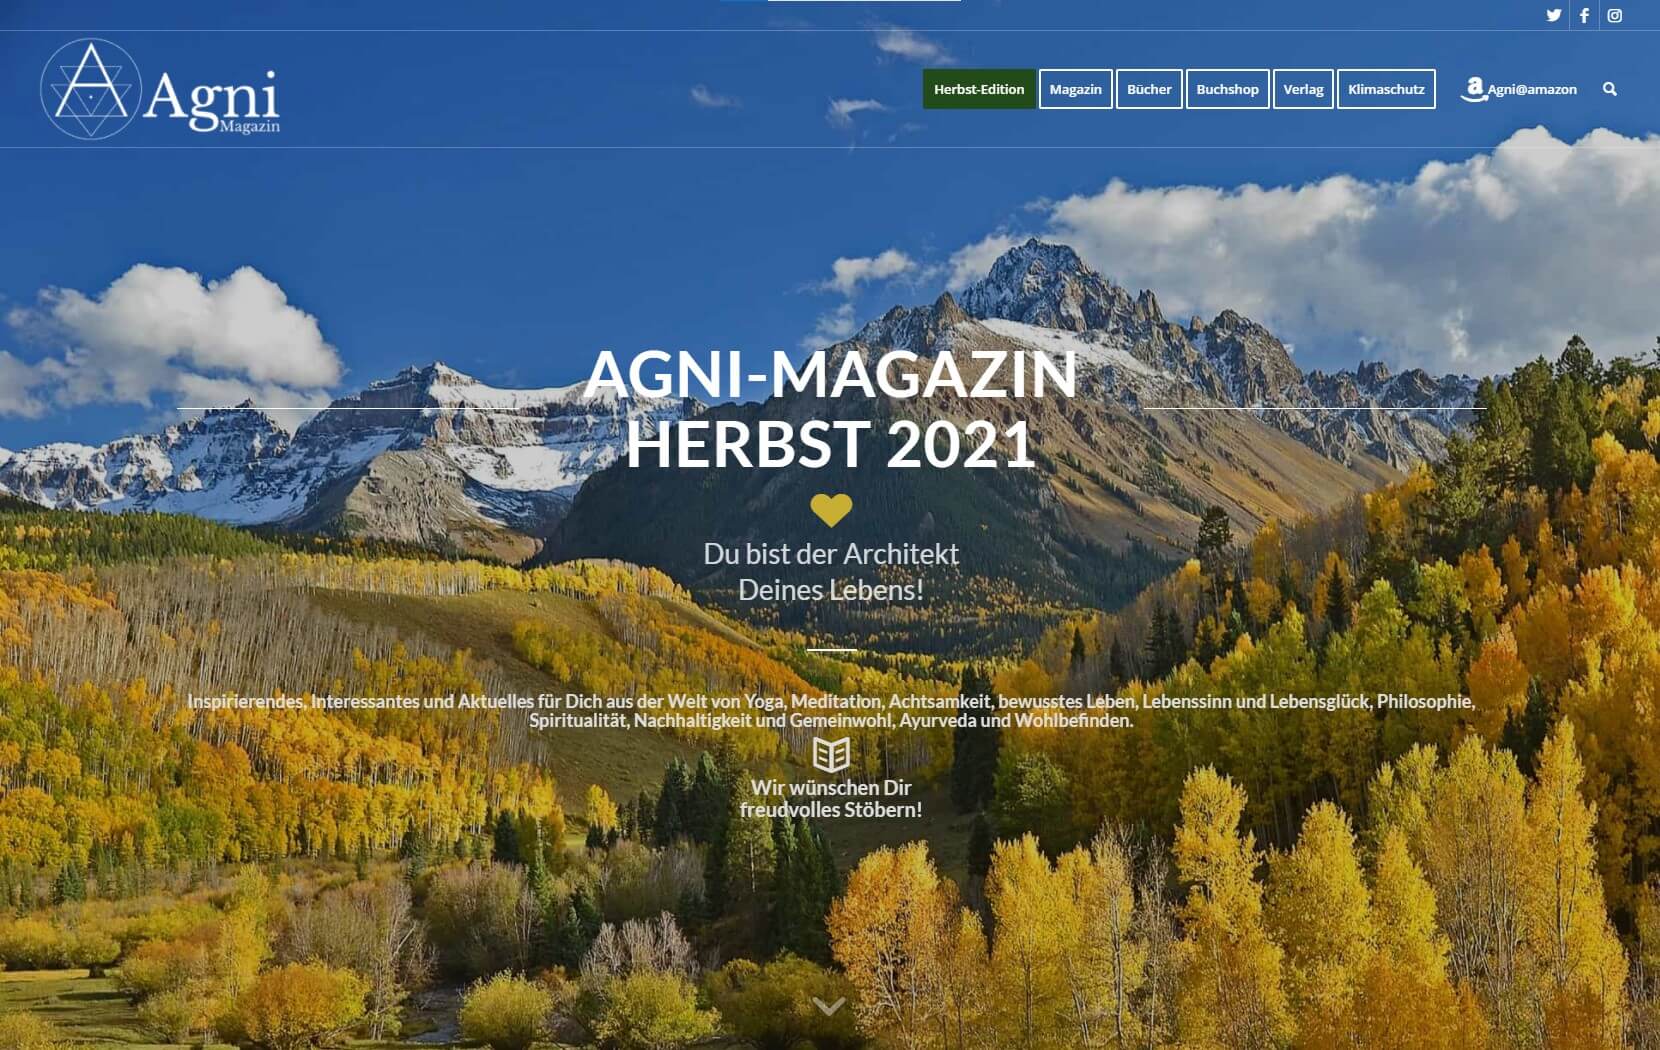 Agni-Magazin Nr. 7 - Herbst-Edition 2021 Preview